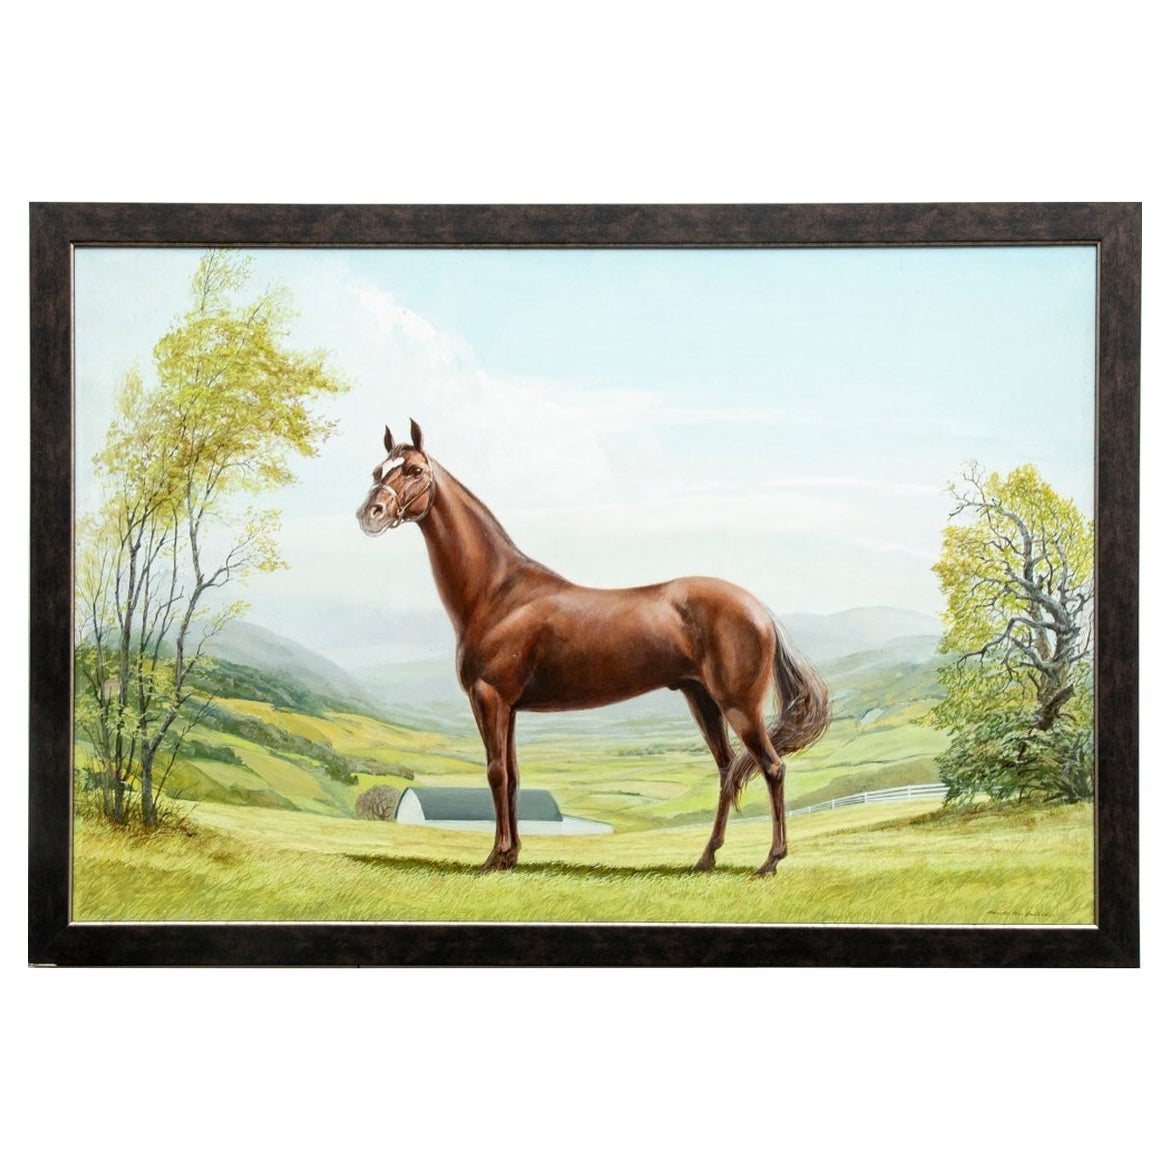 Original Oil on Board 1950, “Portrait of a Horse”, Signed Lower Right by Harold